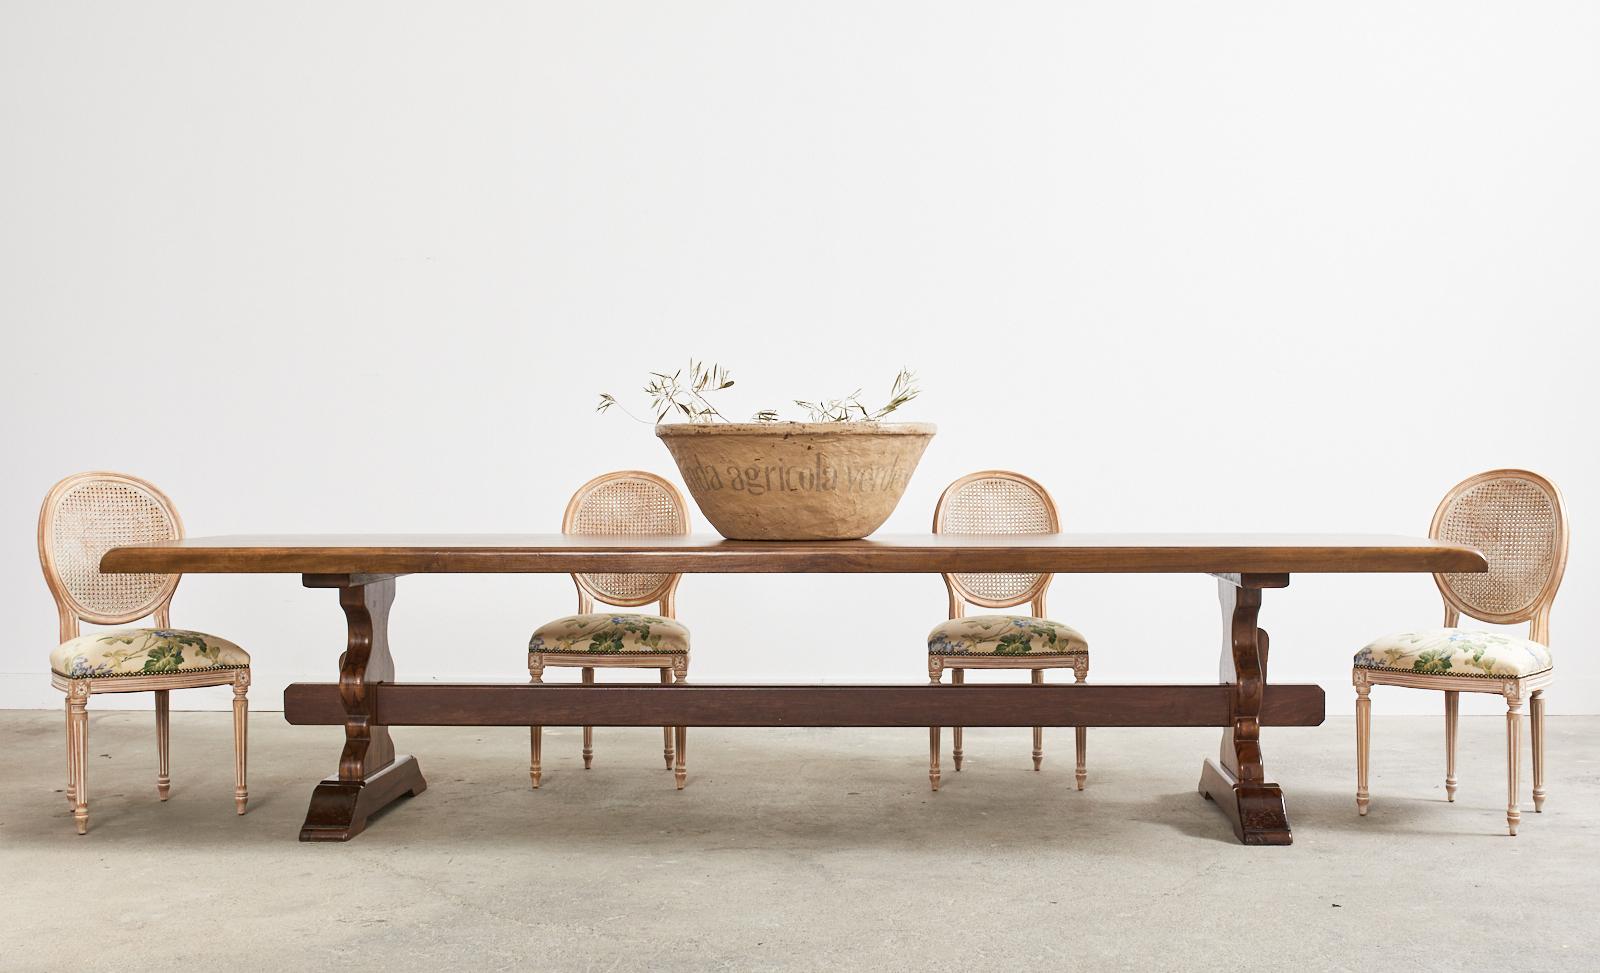 Monumental country French provincial style farmhouse dining table measuring 11.5 feet long. Beautifully crafted from rich walnut featuring a nearly 3 inch thick top. The large table is supported by a long trestle style base with hourglass shaped